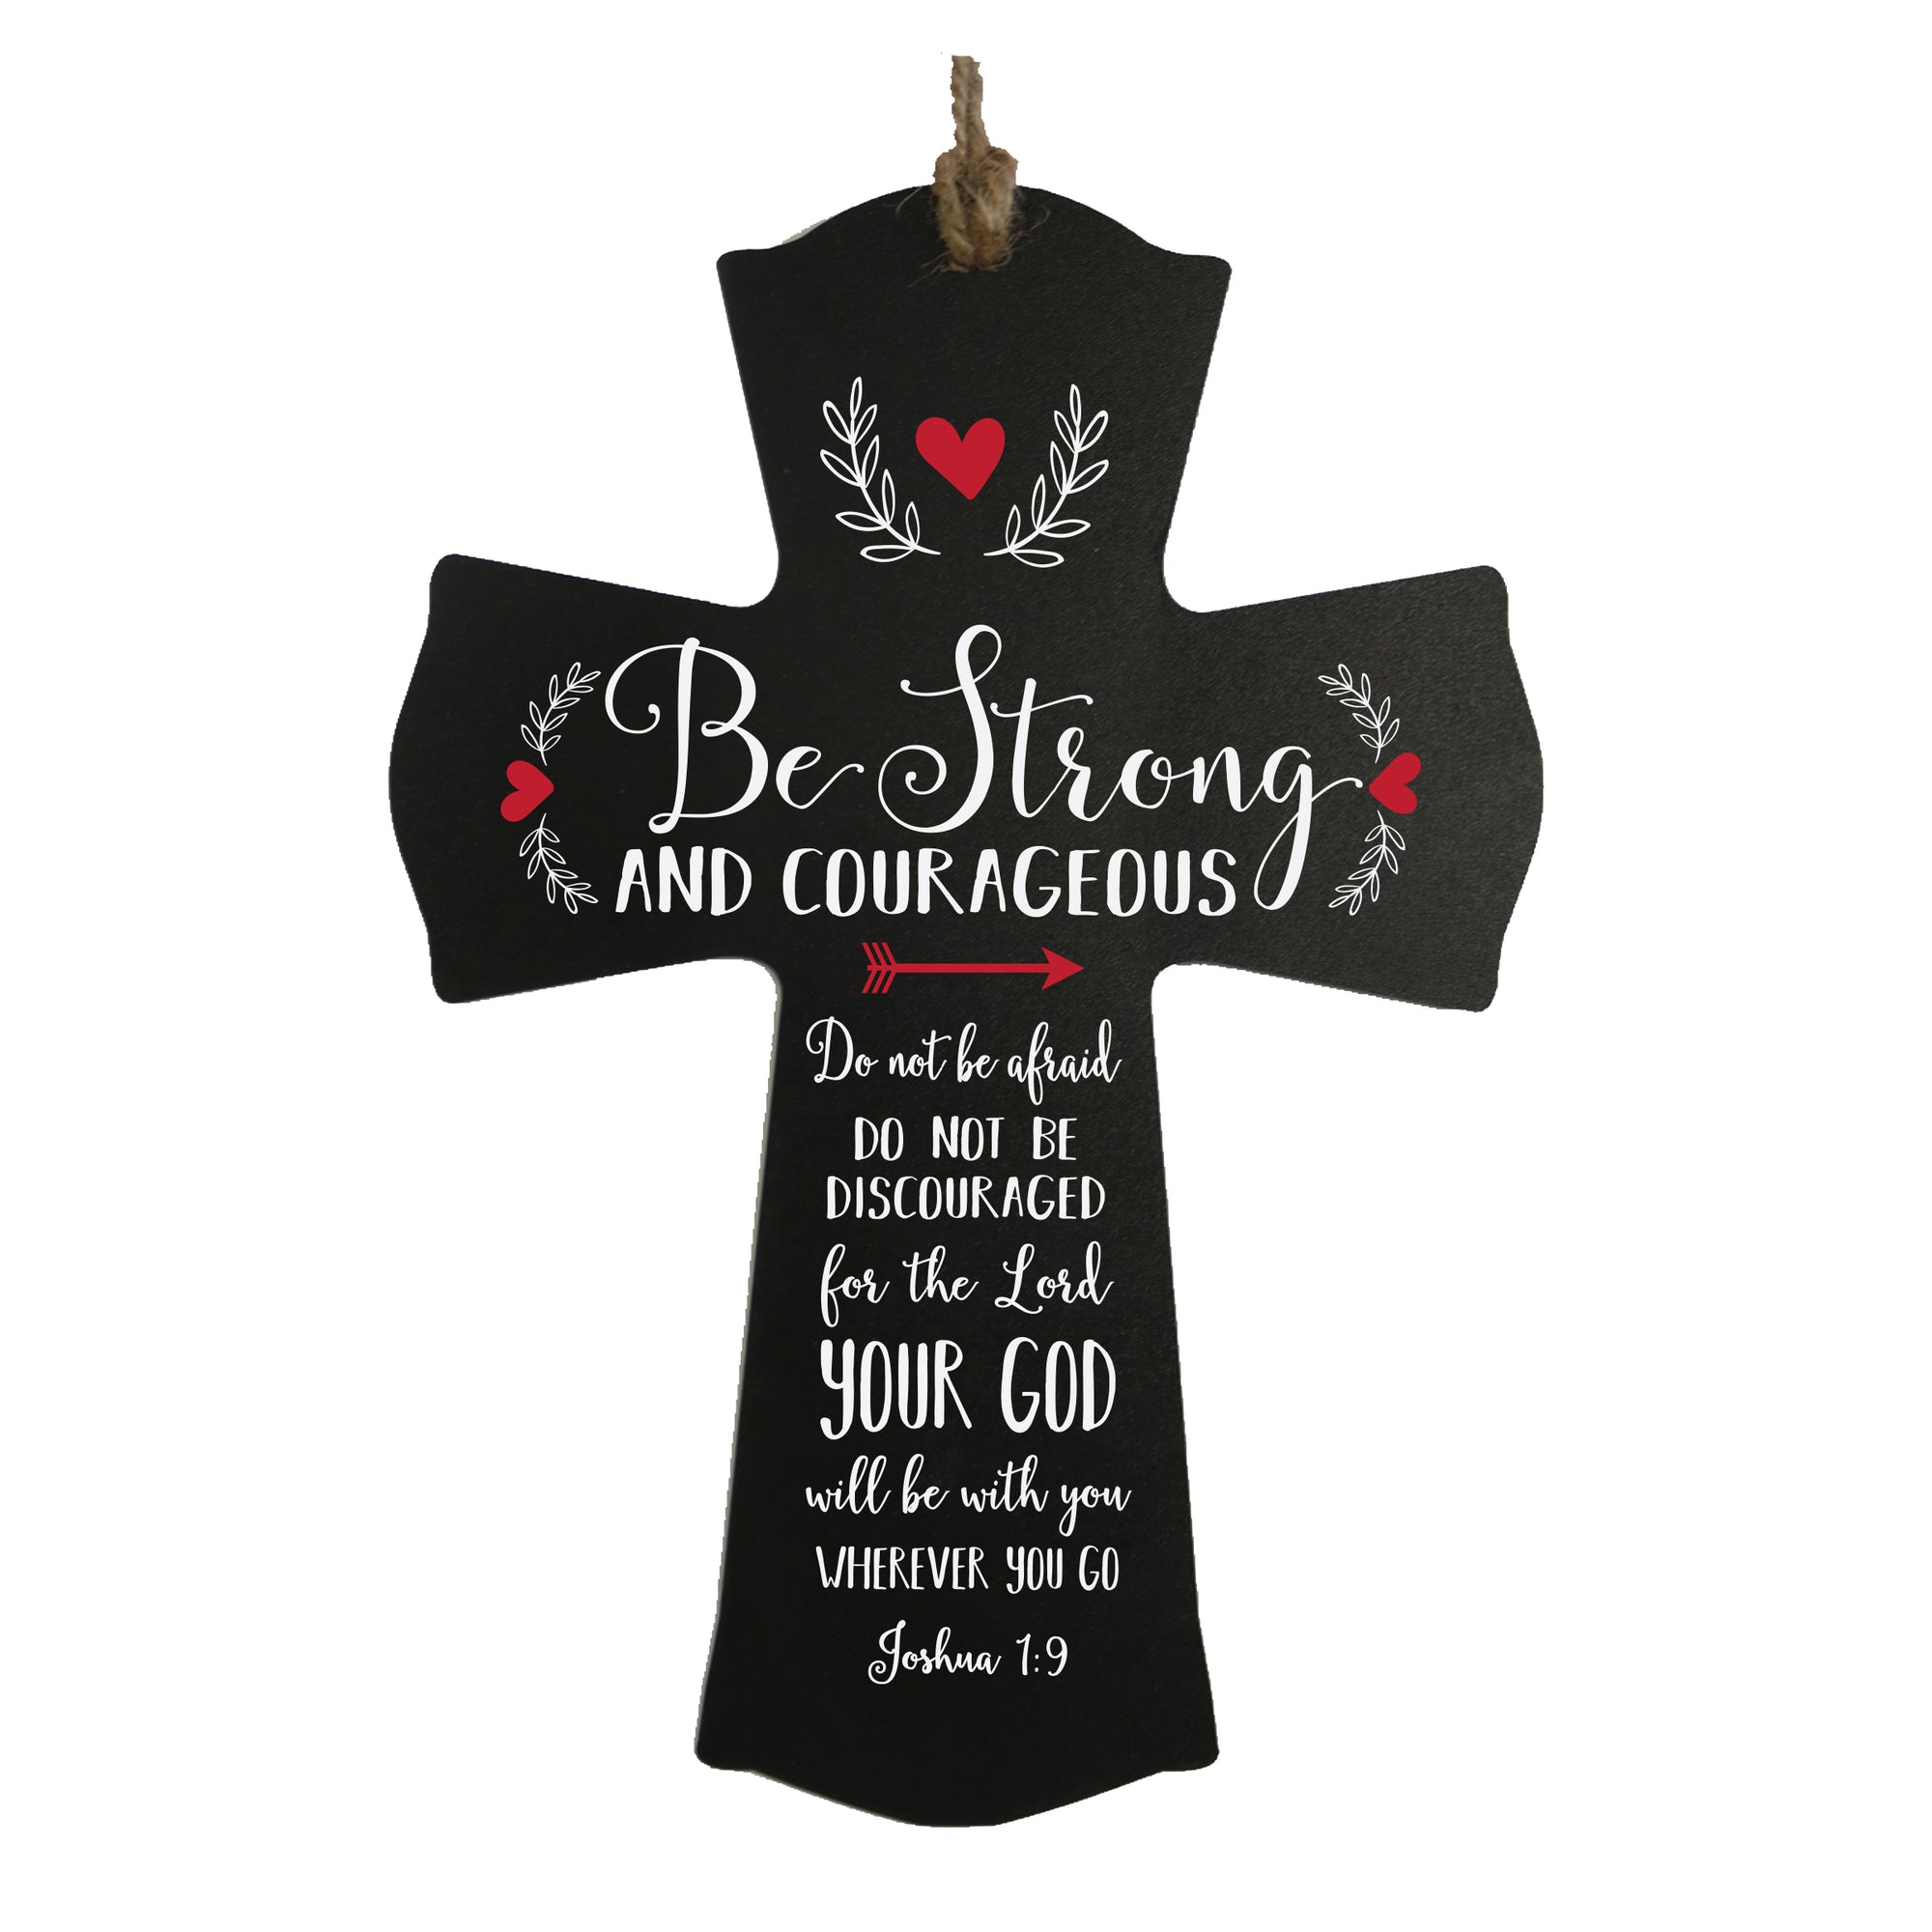 LifeSong Milestones Family Inspirational Wall Cross Decorations for Living Room - Home Wall Art - Wooden Cross Gift 8.5” x 11”